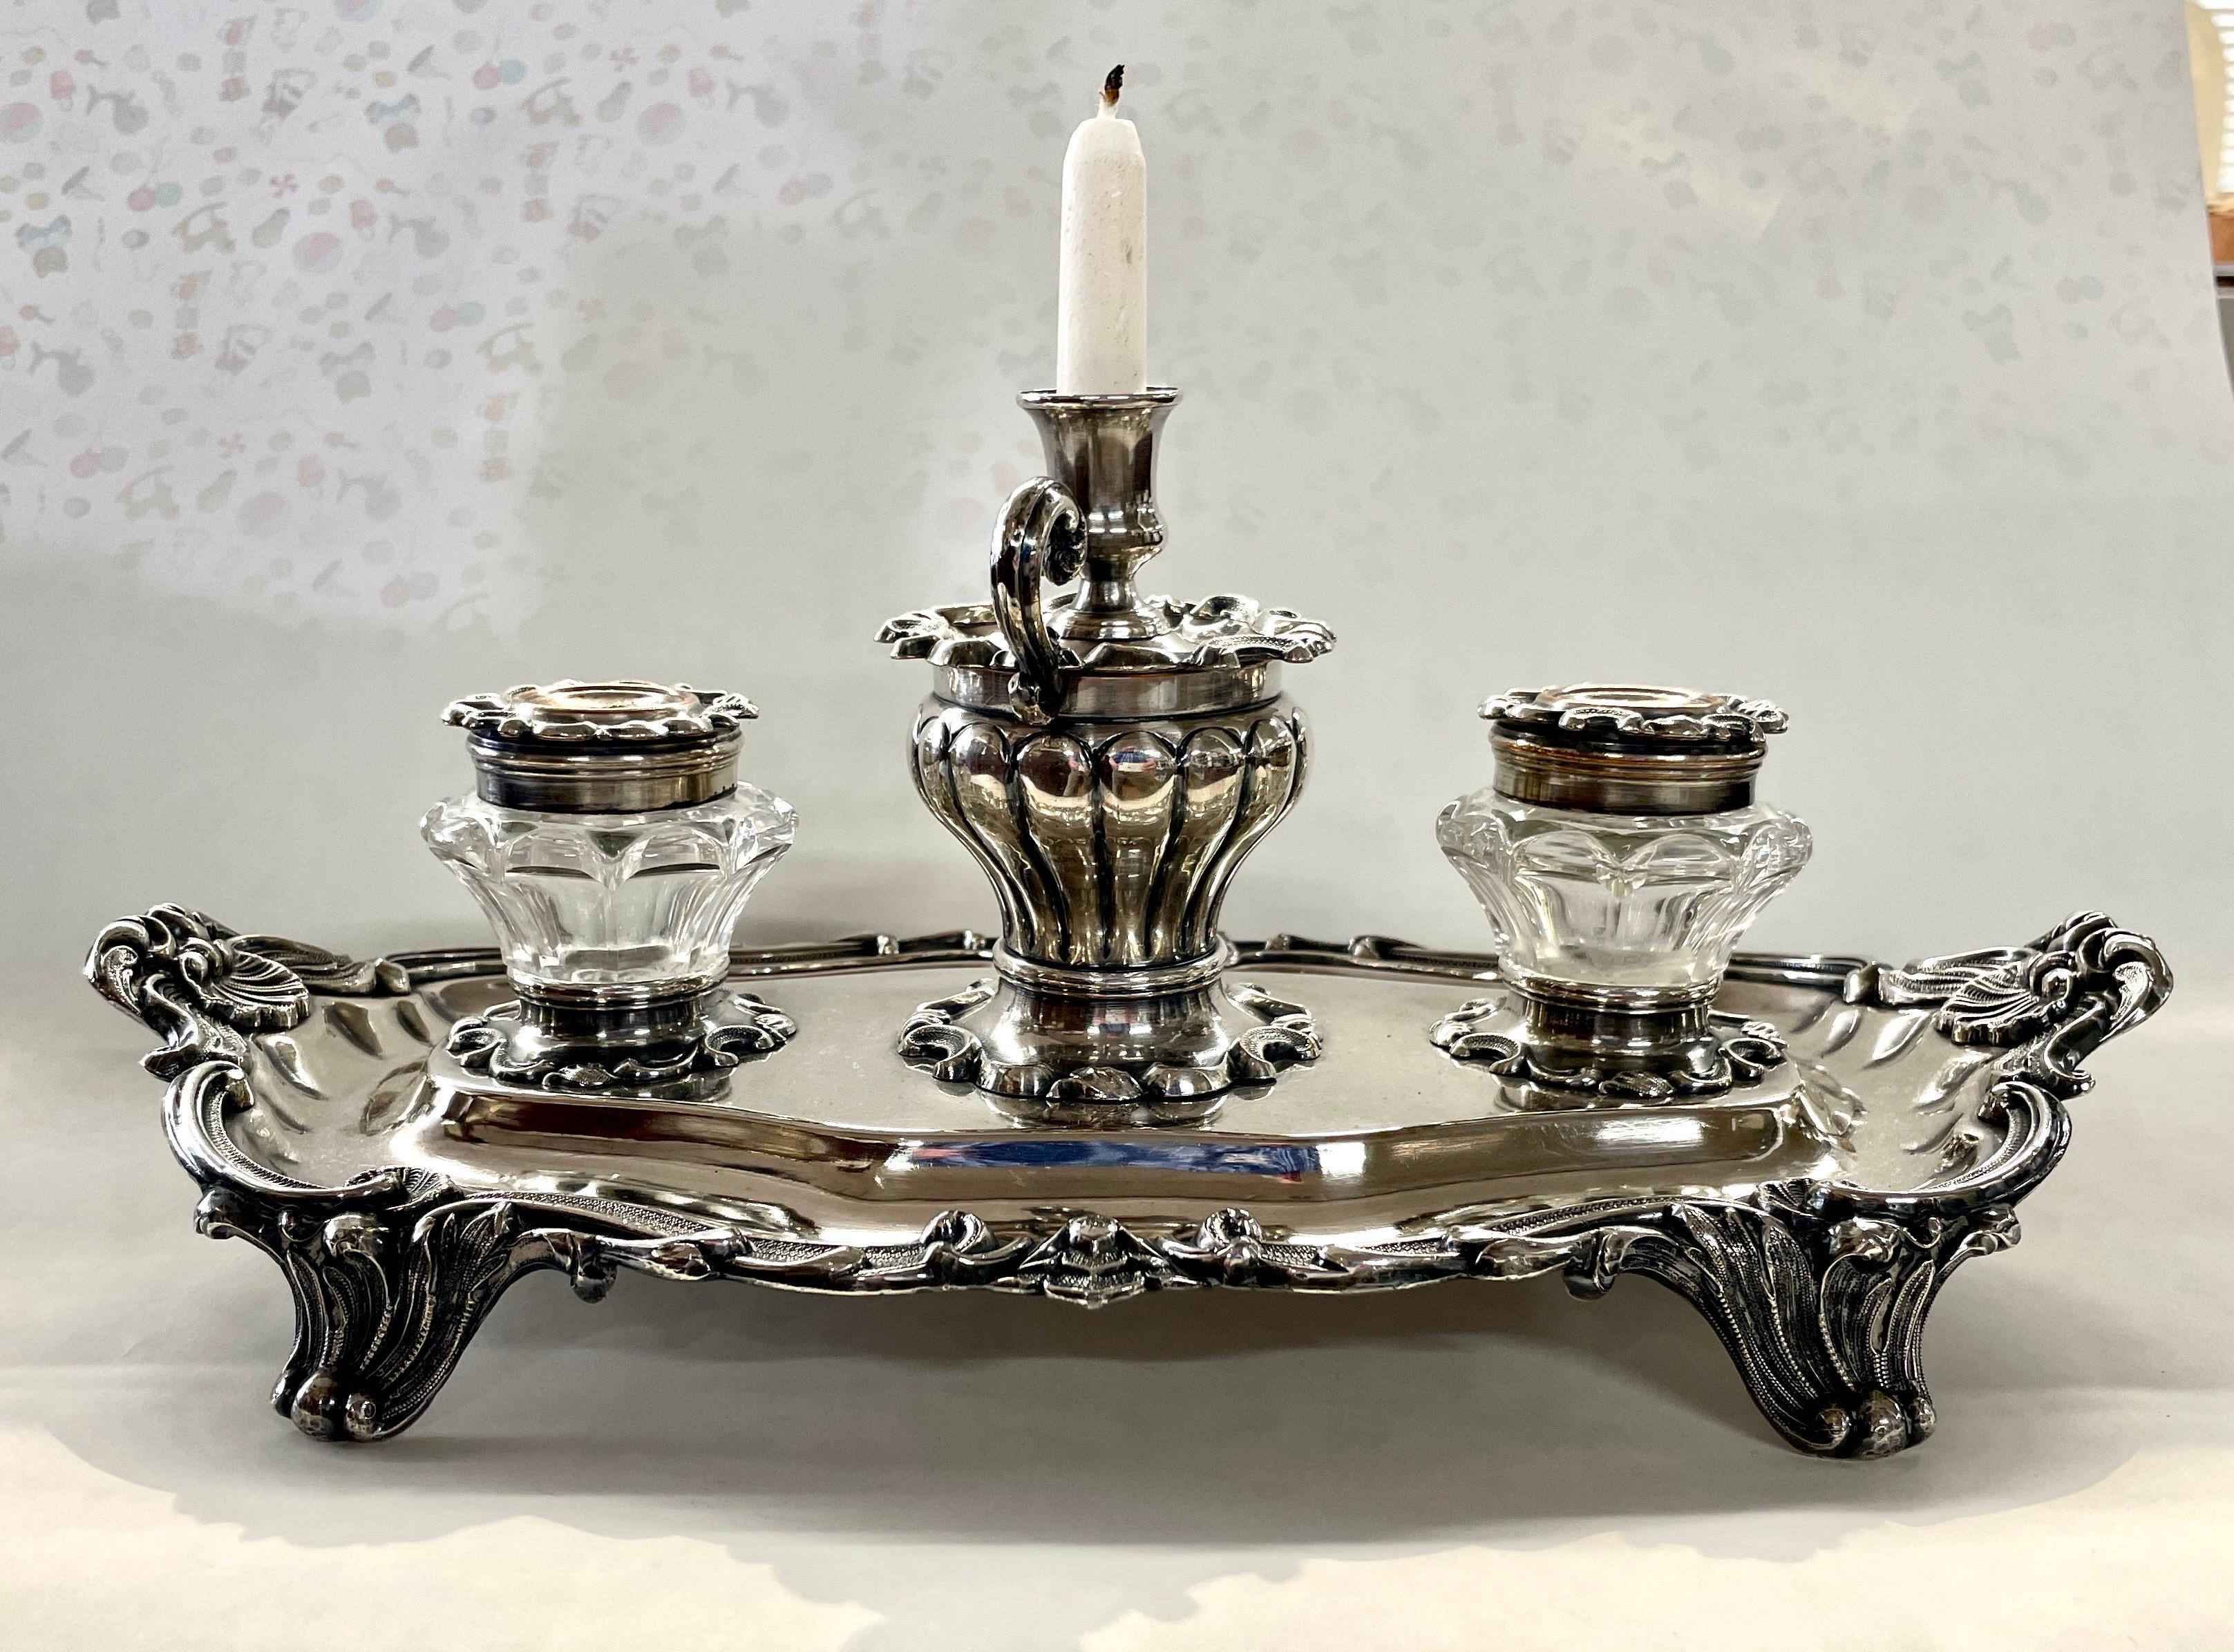 Quite possibly one of the finest pieces of original Matthew Boulton Old Sheffield Plate, this two-bottle Inkstand or Standish is a magnificent example of the silversmith with whom Old Sheffield Plate is identified as its 